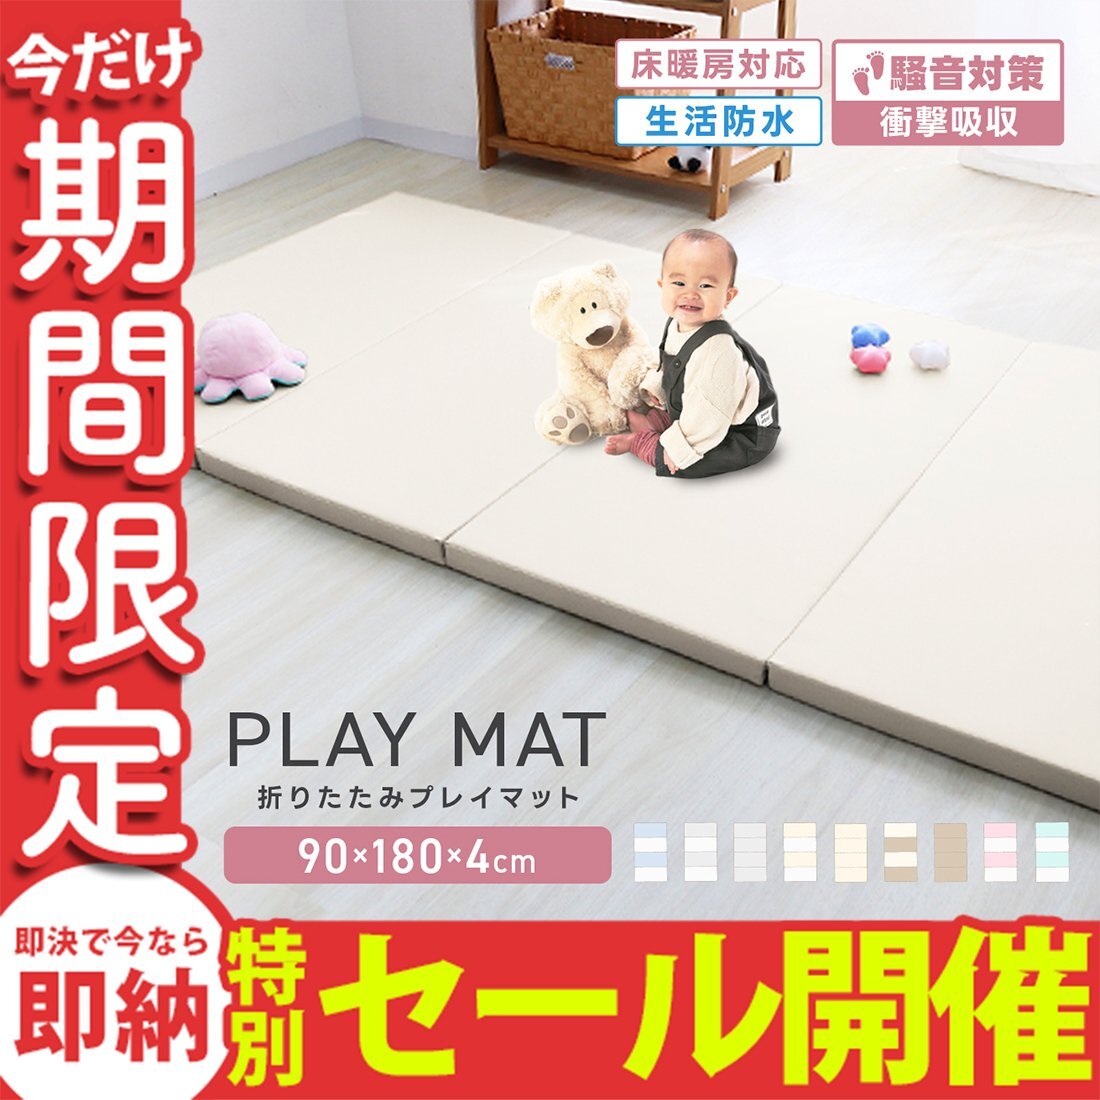 [ limited amount sale ] play mat thick folding large size mat baby floor heating correspondence 4cm 180cm floor mat non ho rum waterproof soundproofing light weight 